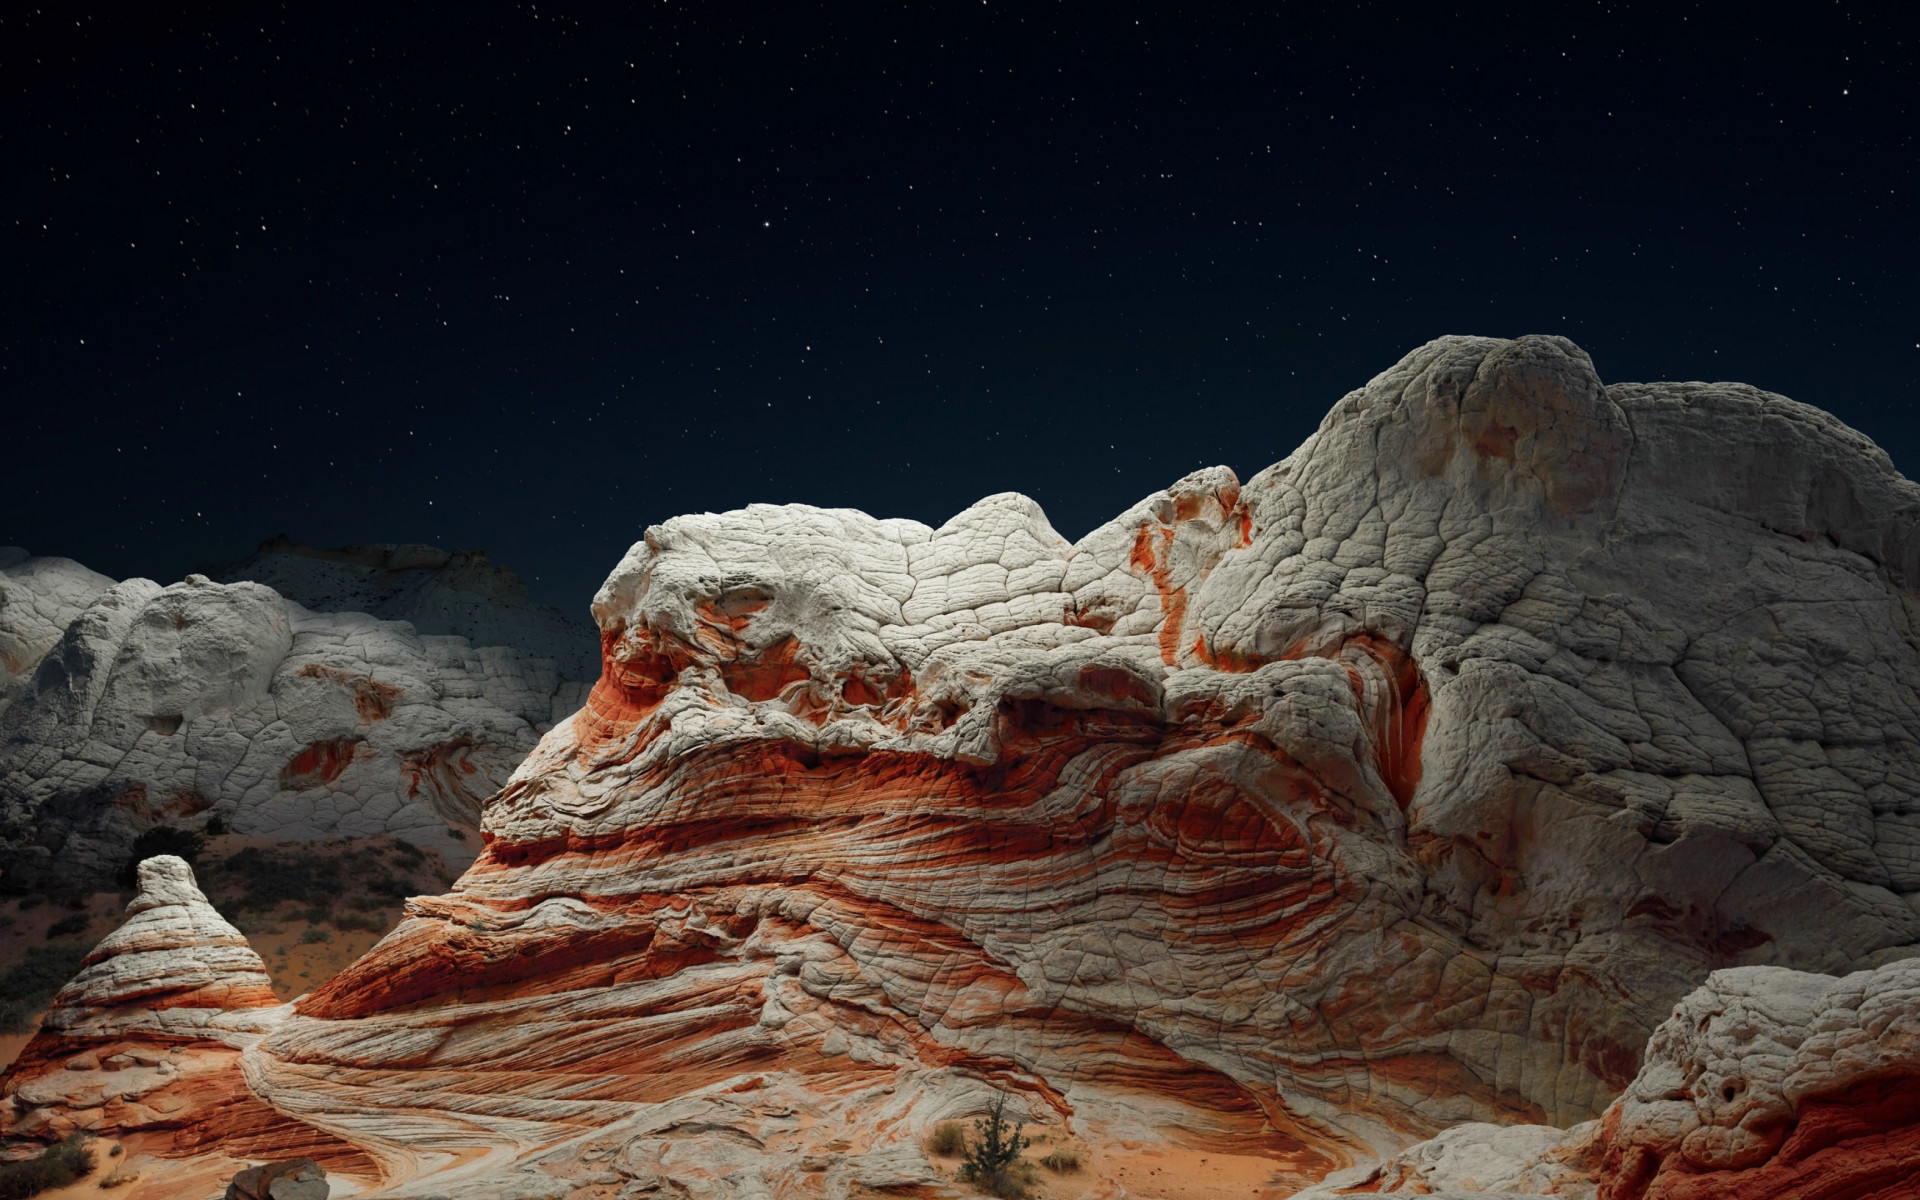 The night sky and desert valley wallpaper 1920x1200